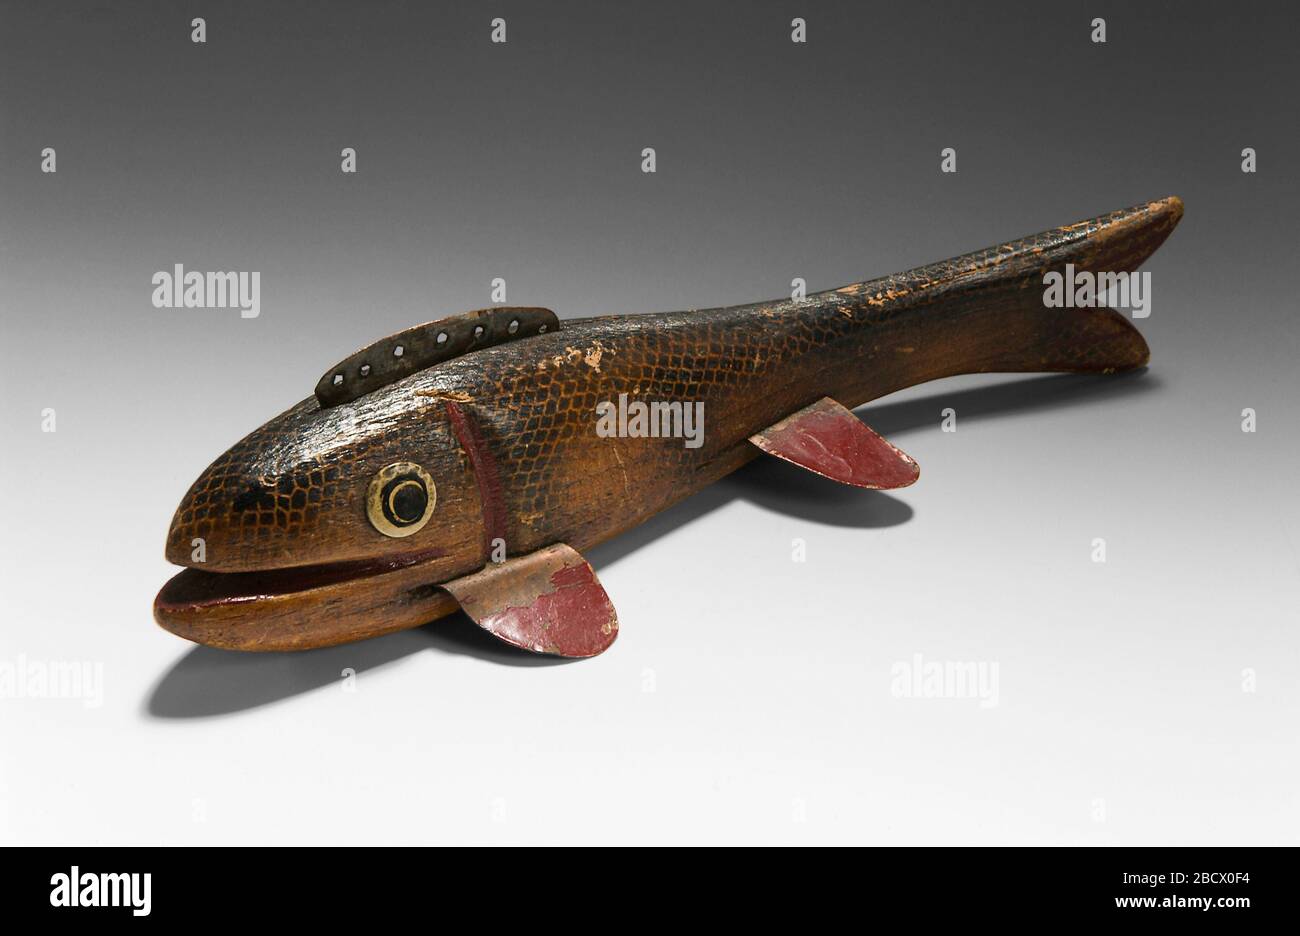 Fish Decoy. Carved fish decoys are one of the earliest forms of